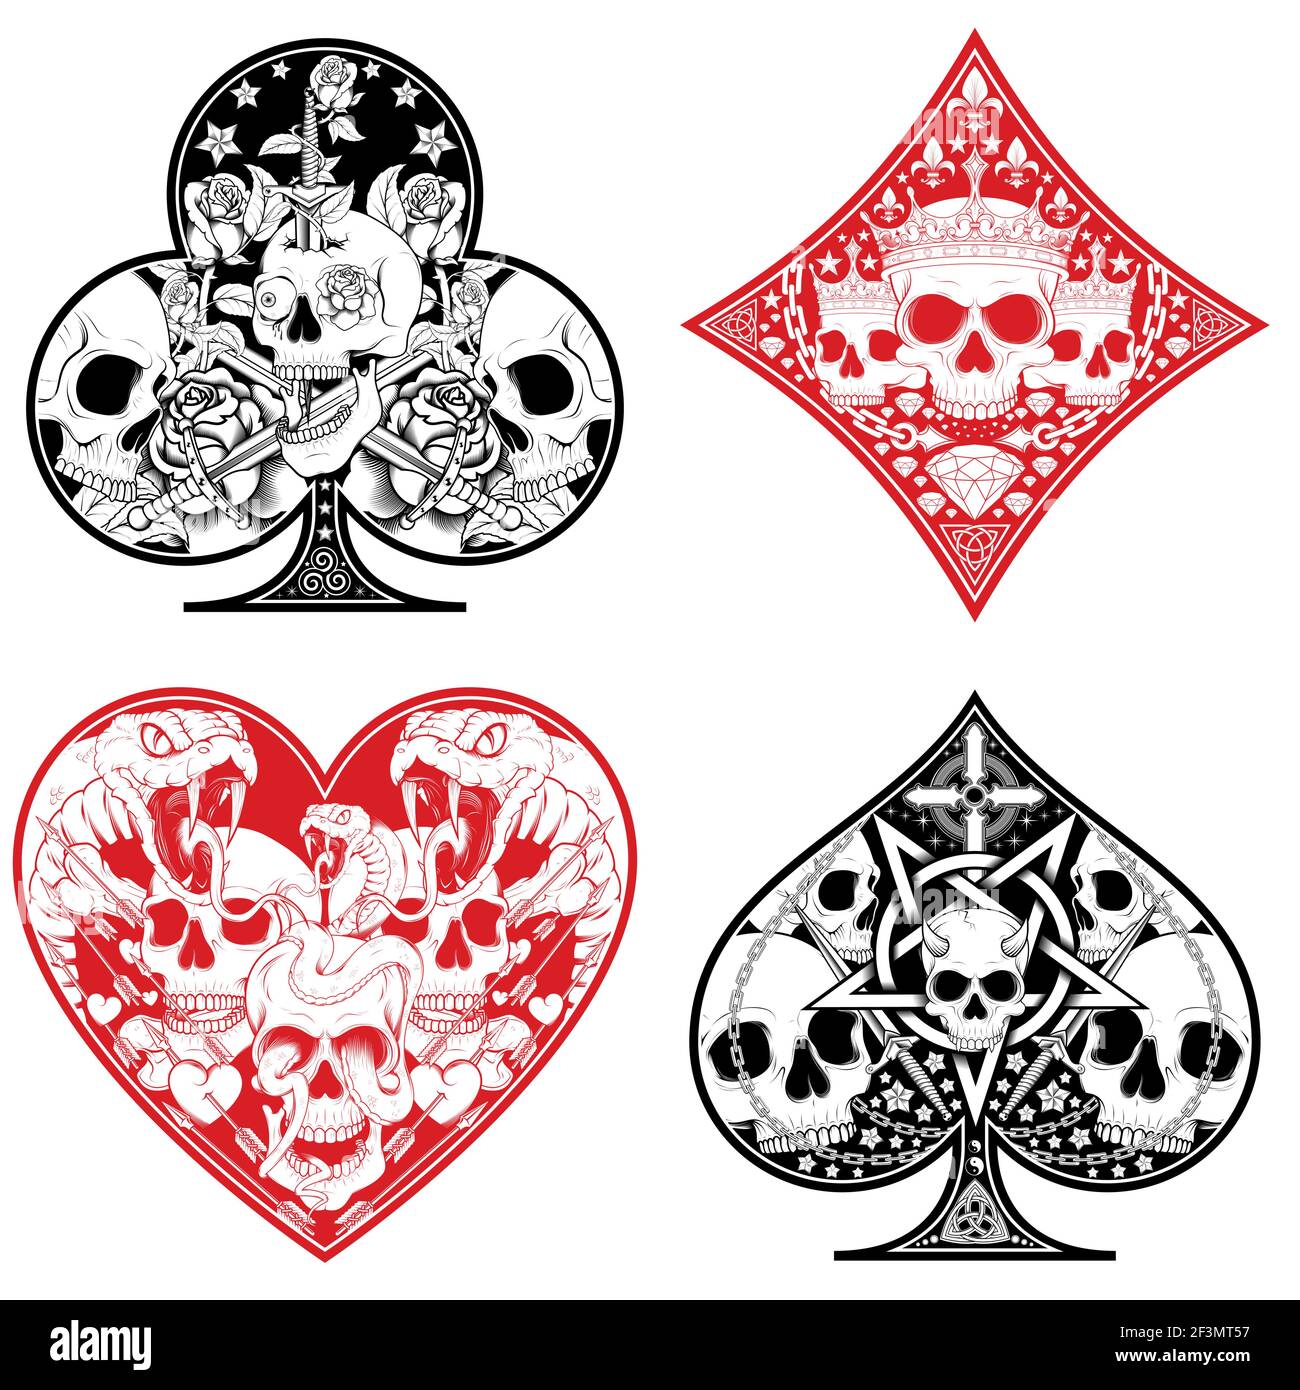 vector design of heart, diamond, clover and ace poker symbols with different skull designs Stock Vector